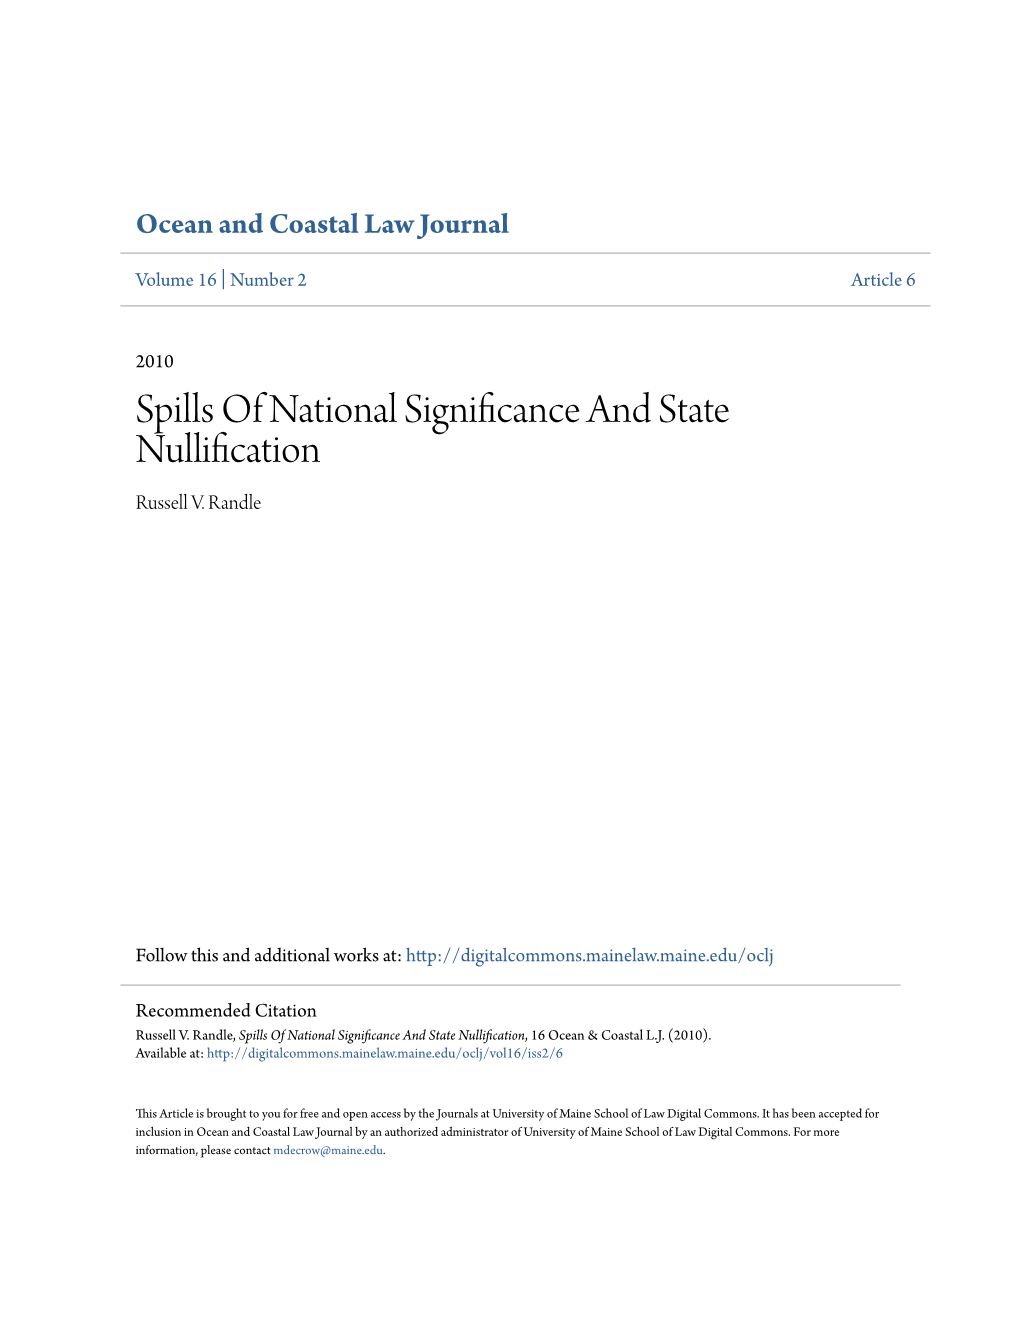 Spills of National Significance and State Nullification Russell V